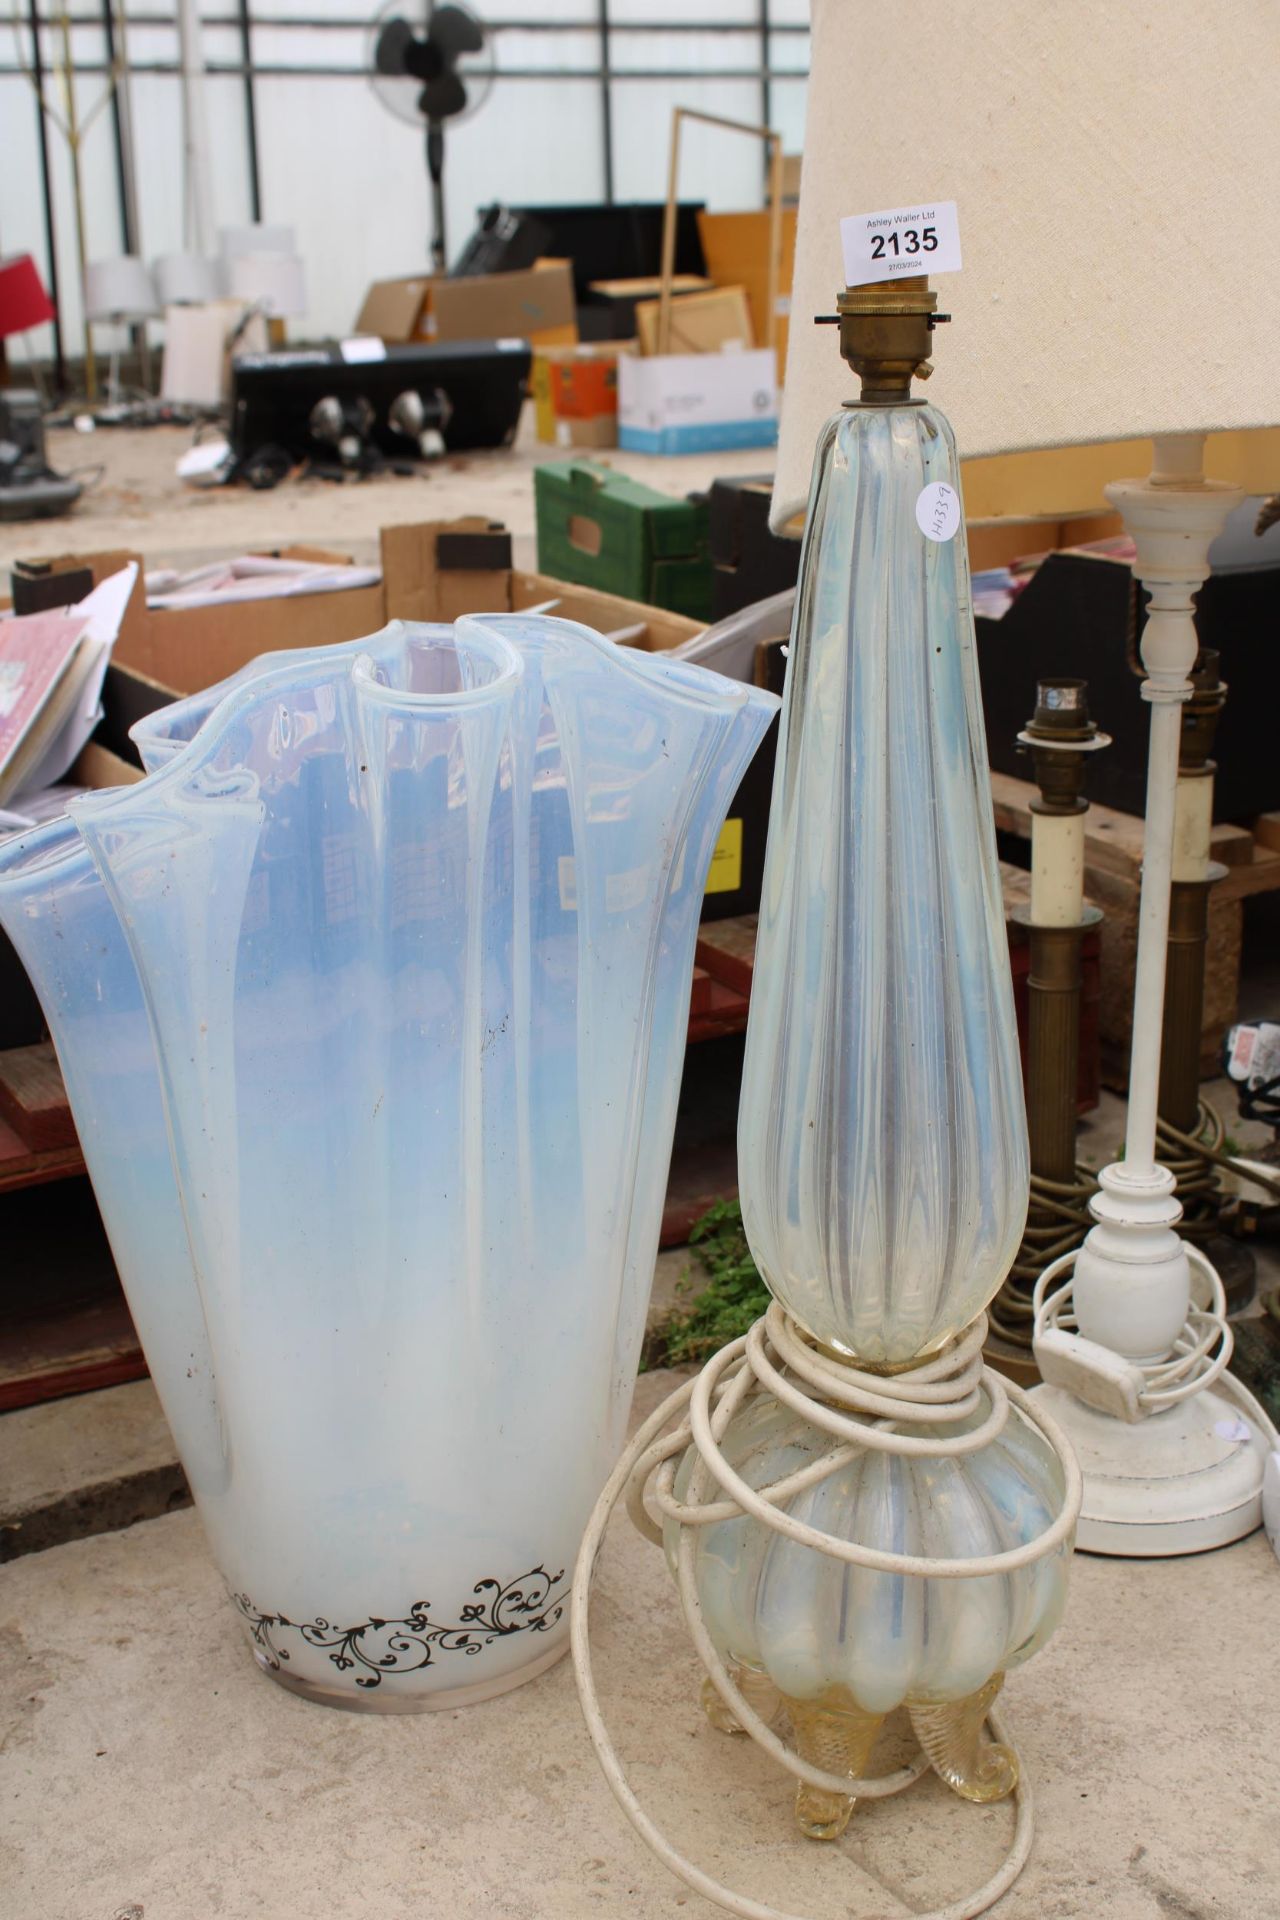 A DECORATIVE GLASS TABLE LAMP AND A FURTHER DECORATIVE GLASS VASE - Image 3 of 3